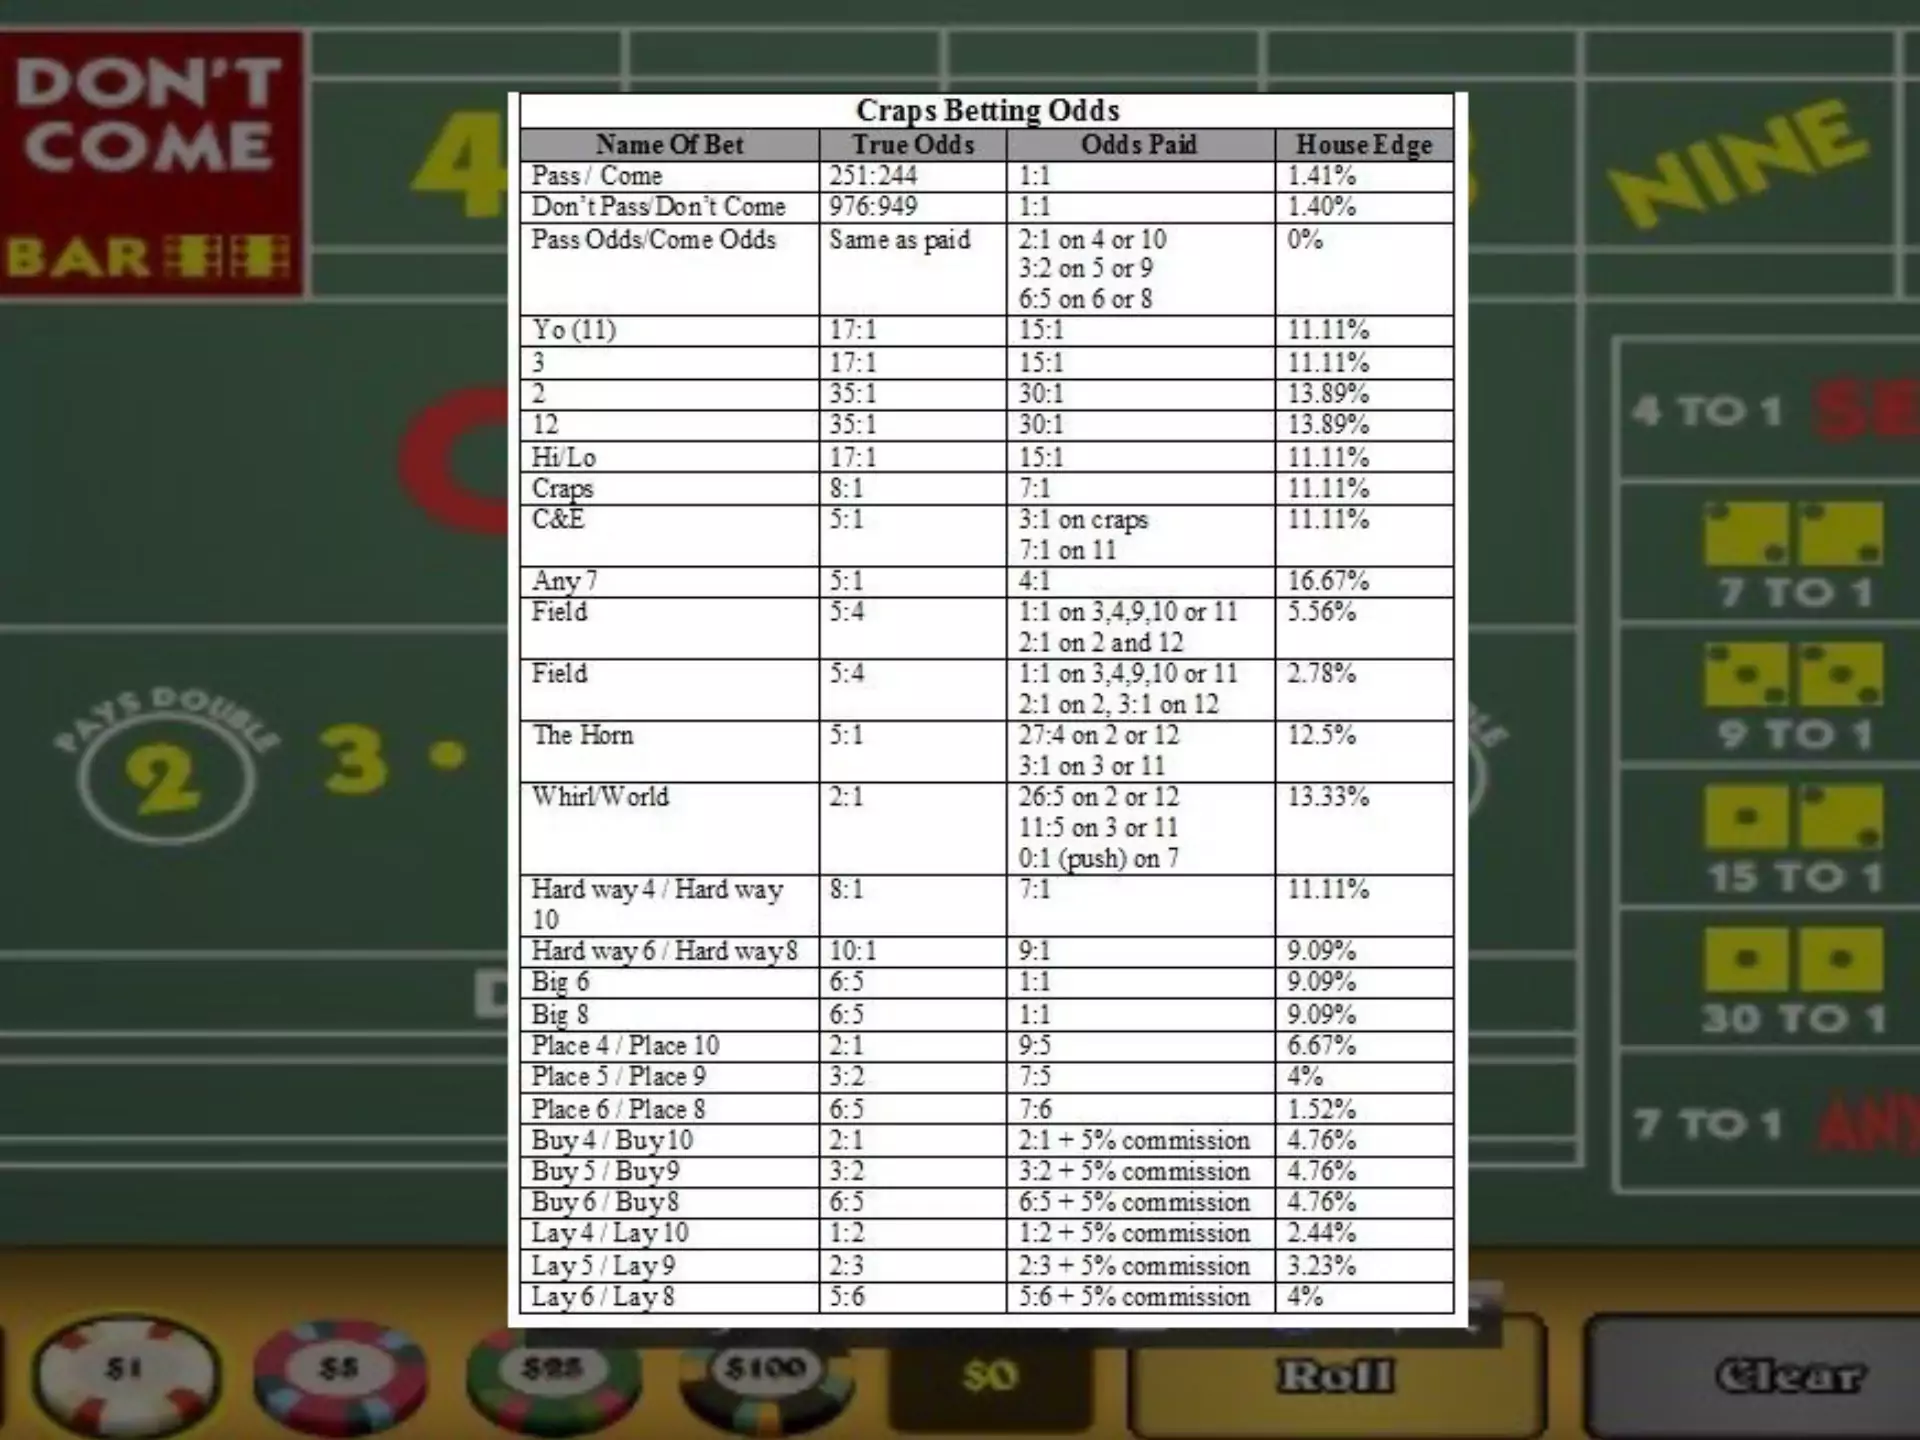 You can calculate odds while playing the craps.